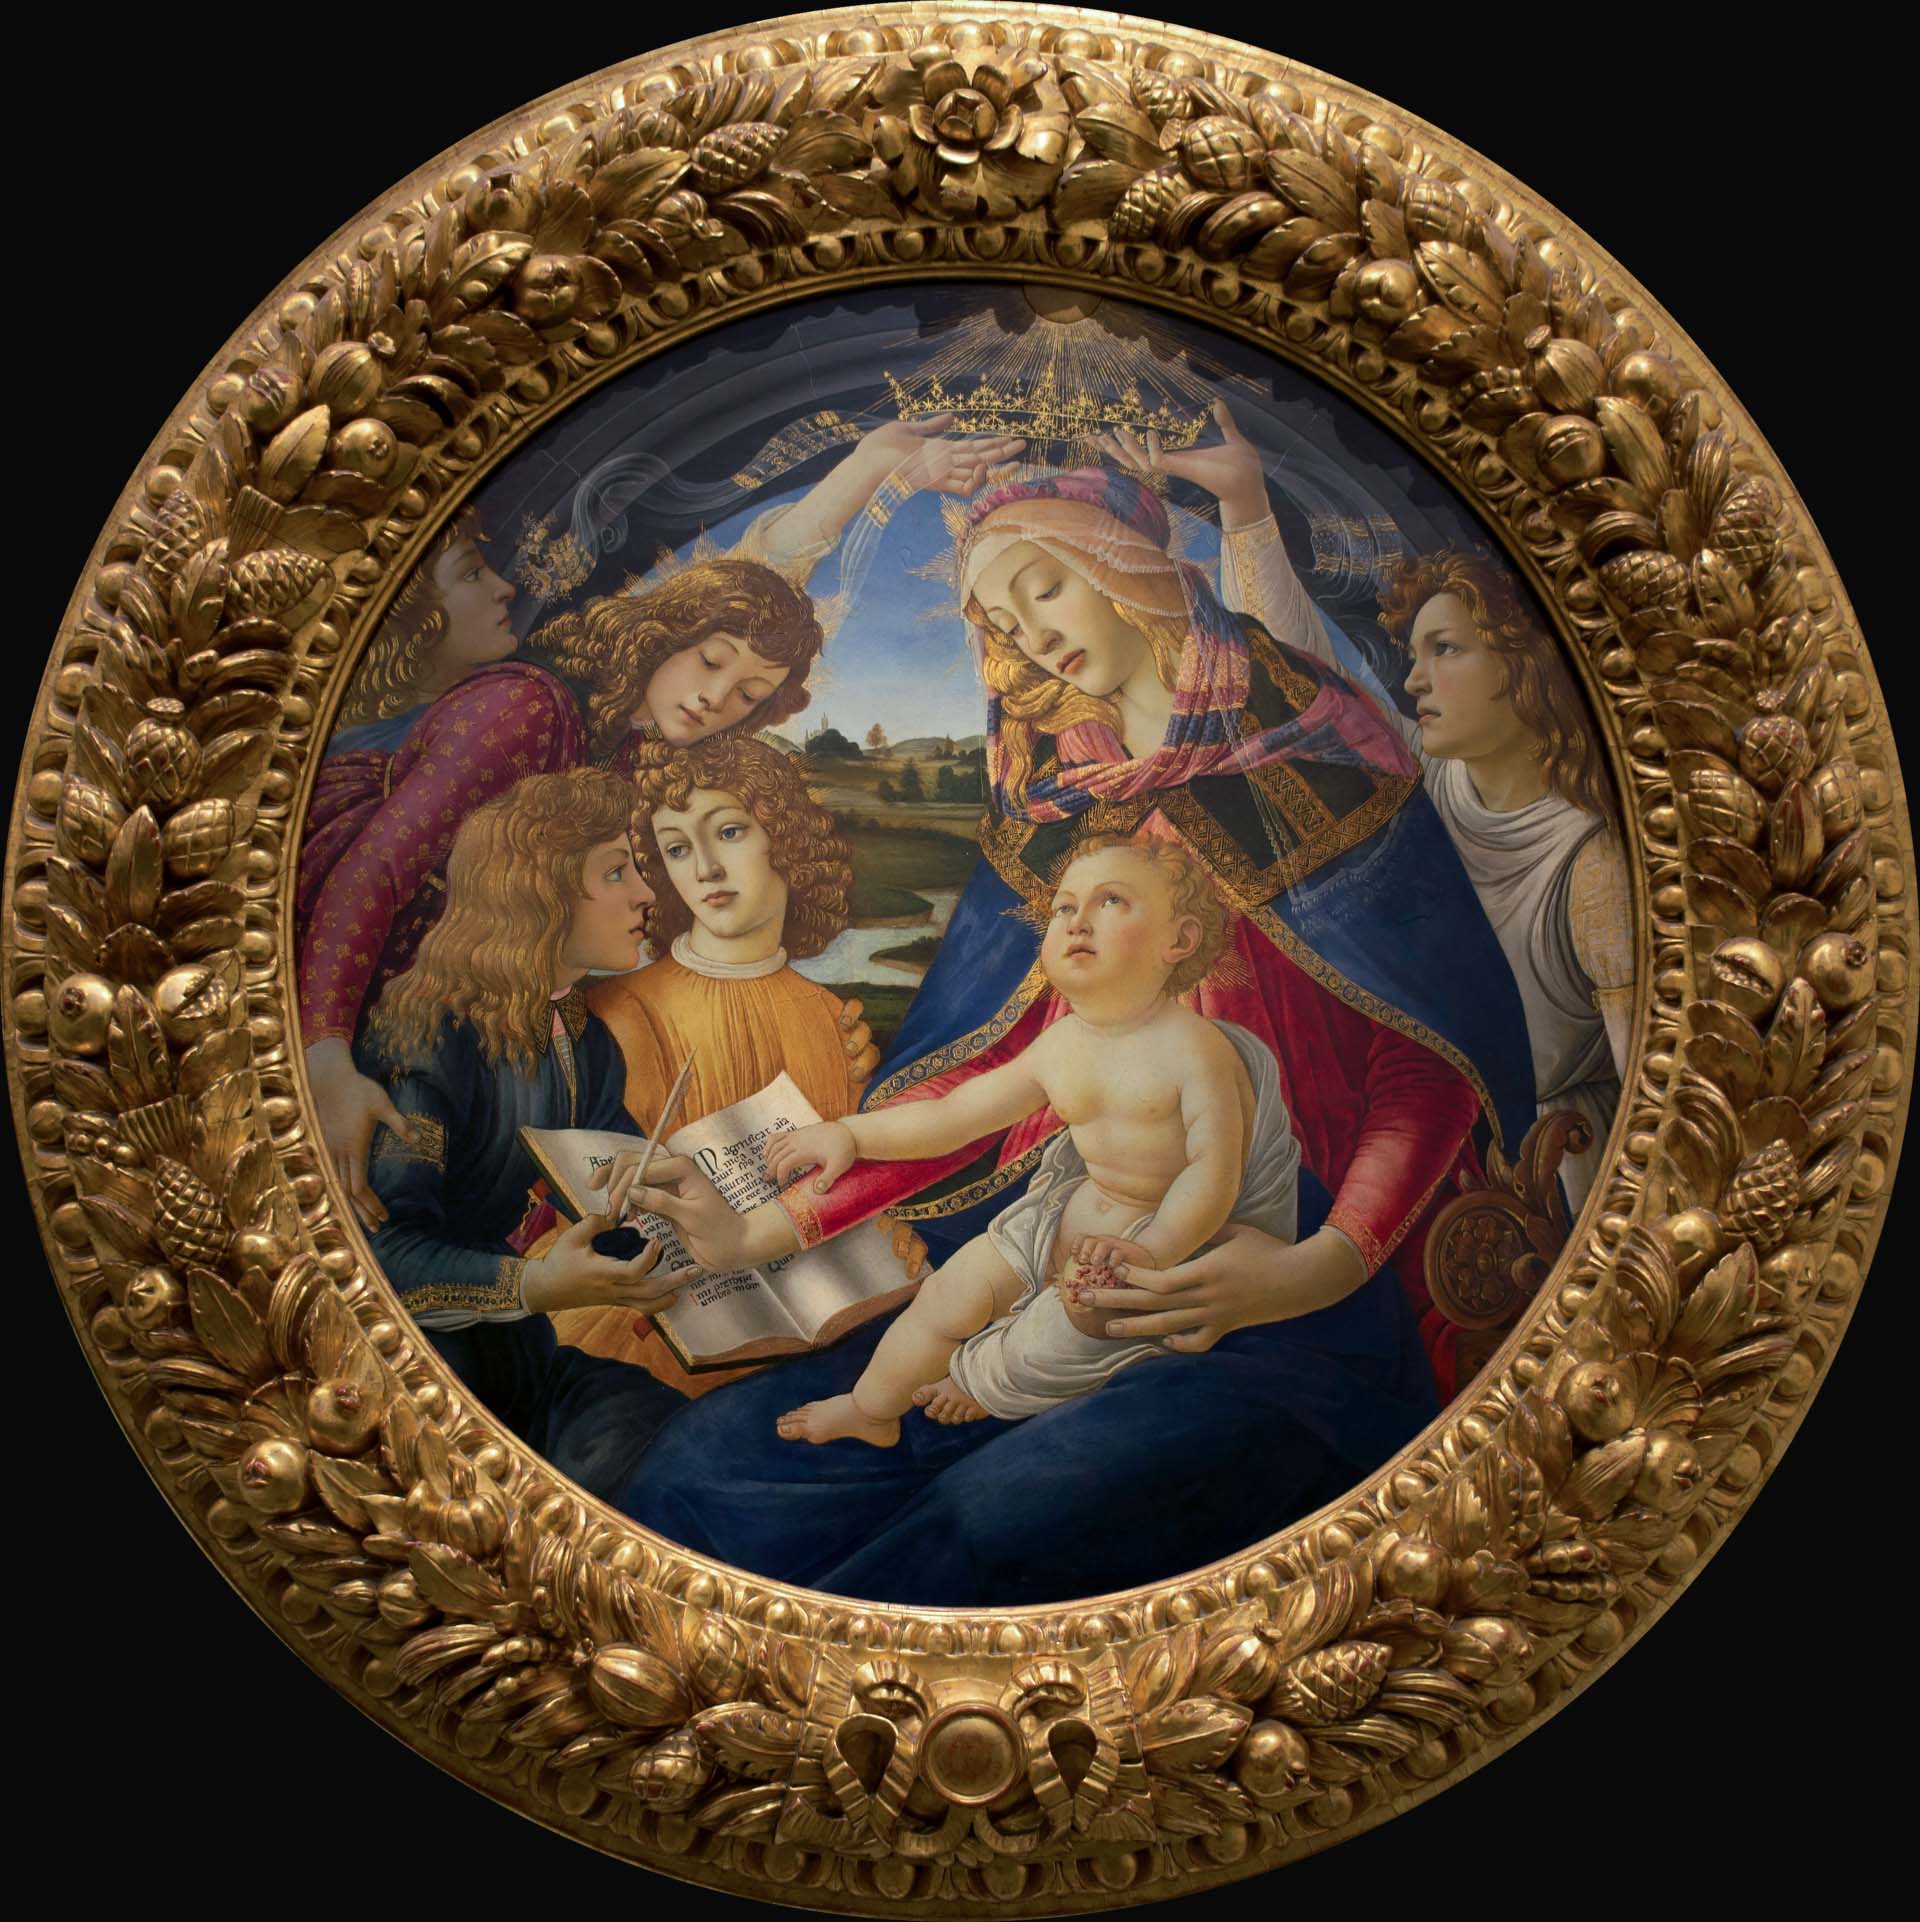 The original Madonna of the Magnificat by Sandro Botticelli